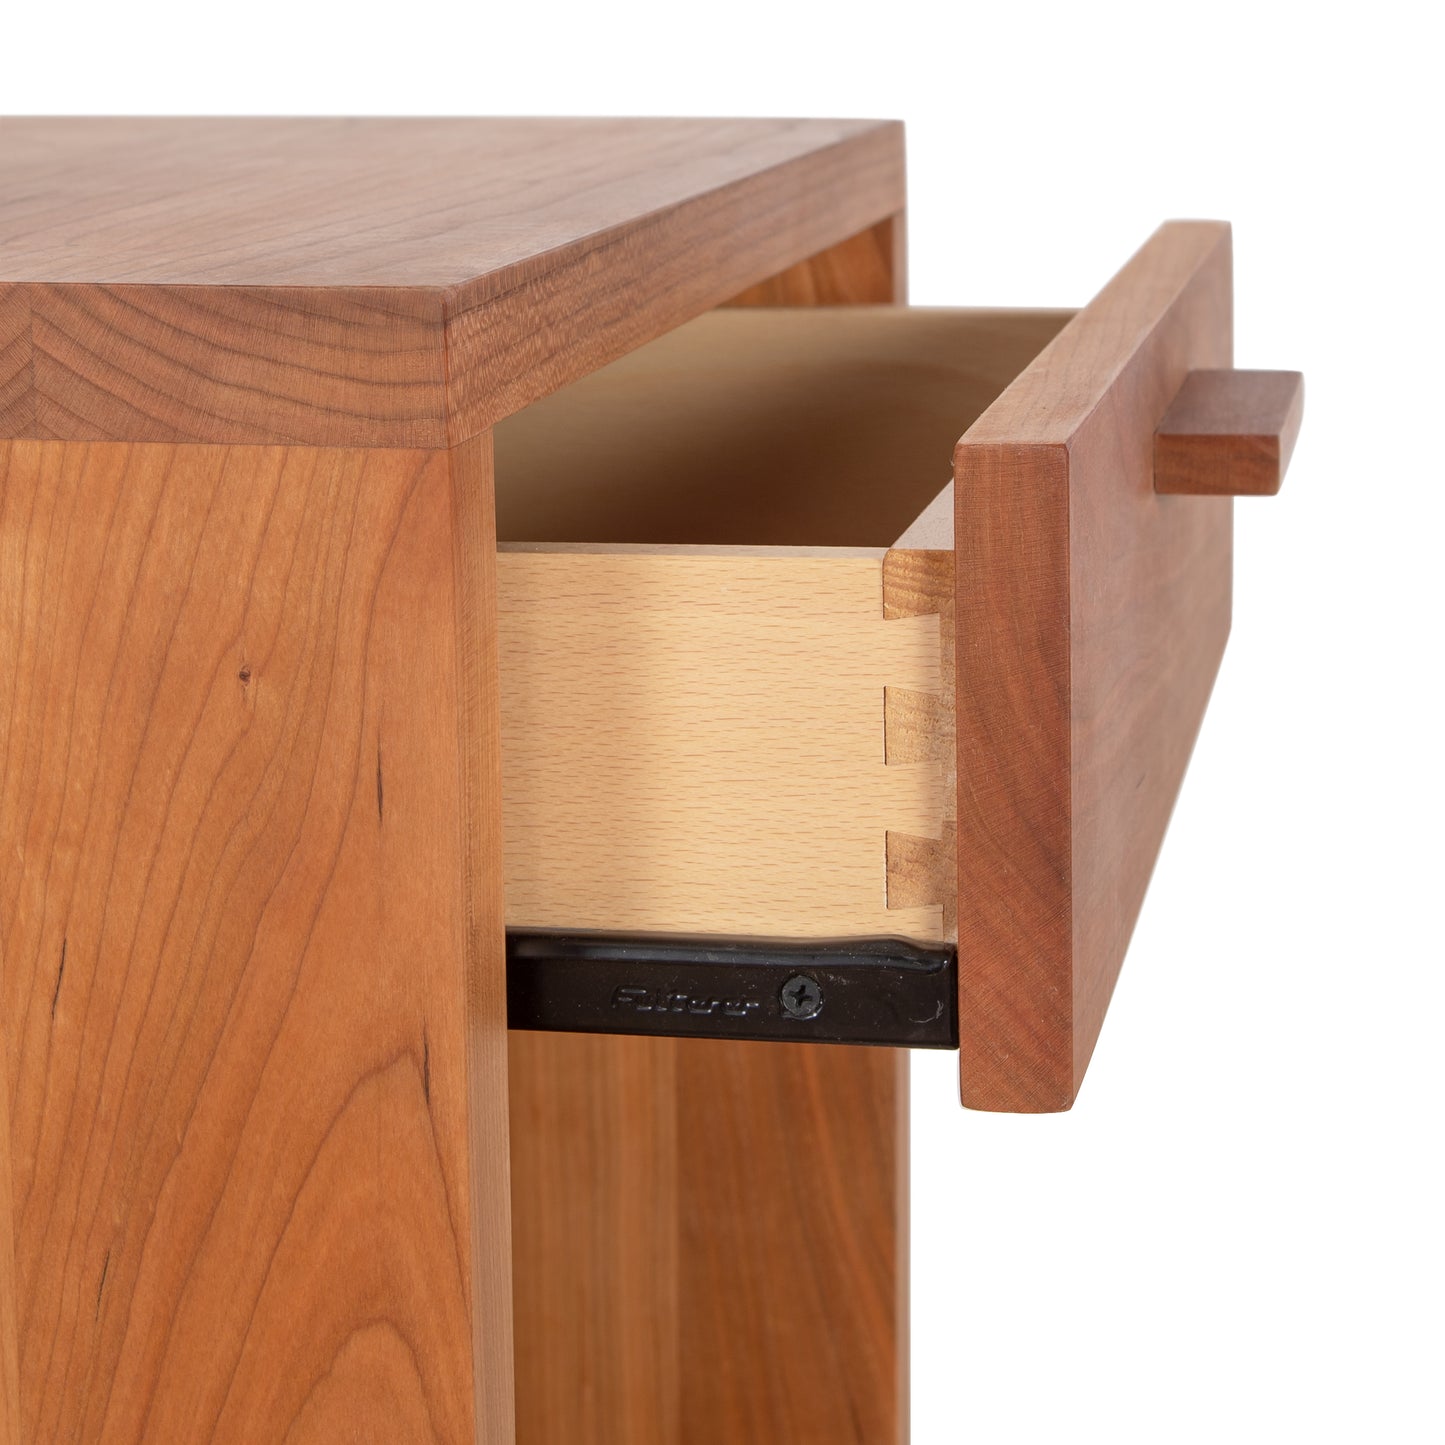 Vermont Furniture Designs Loft 1-Drawer Enclosed Shelf Nightstand with an open drawer showing dovetail joints and a metal drawer slide mechanism.